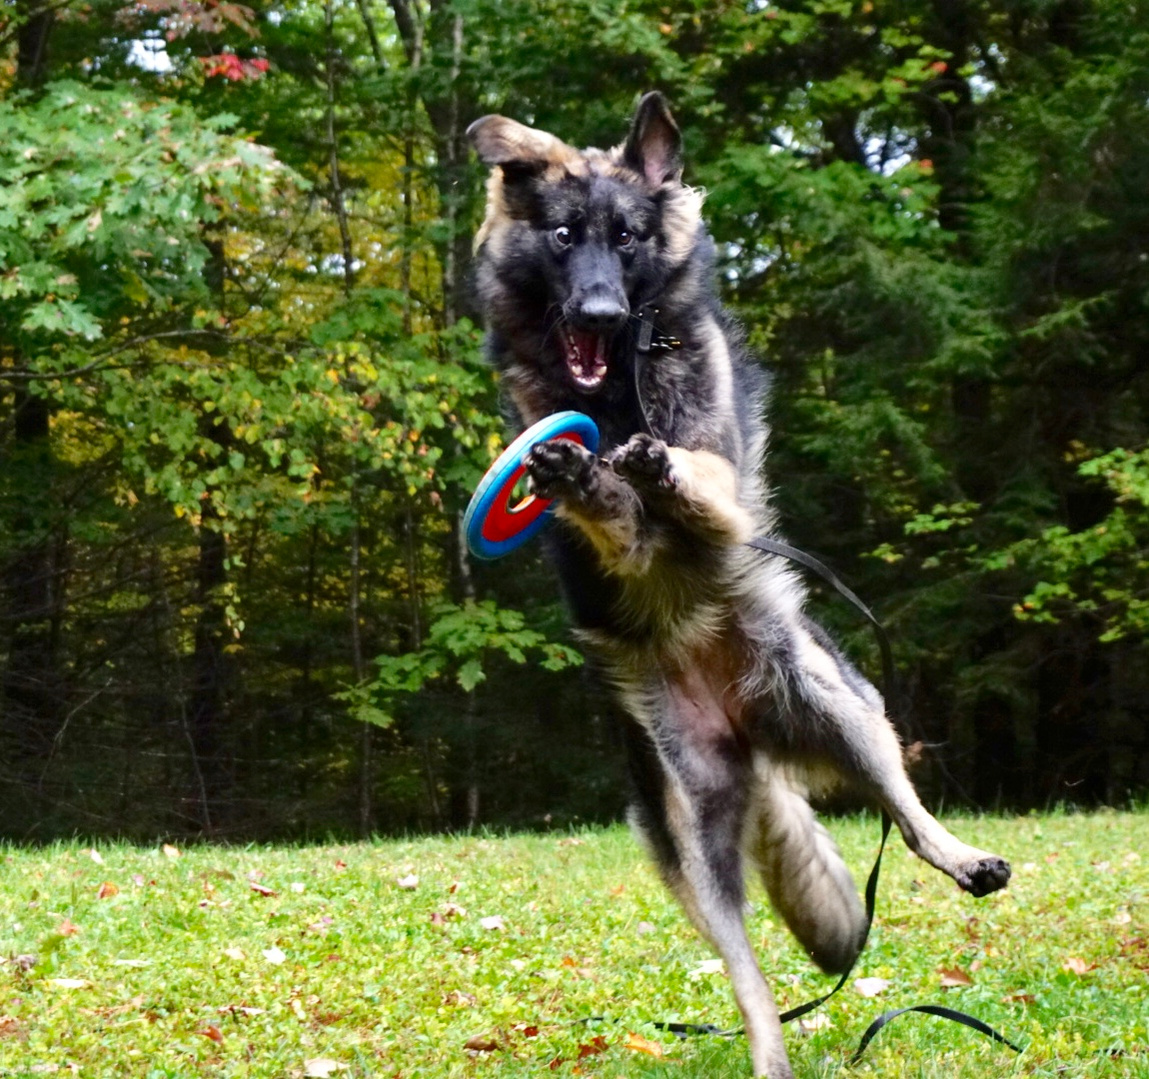 Frisbee fun outside with your dog. Dog activities to do in the autumn. Play in the leaves and foliage